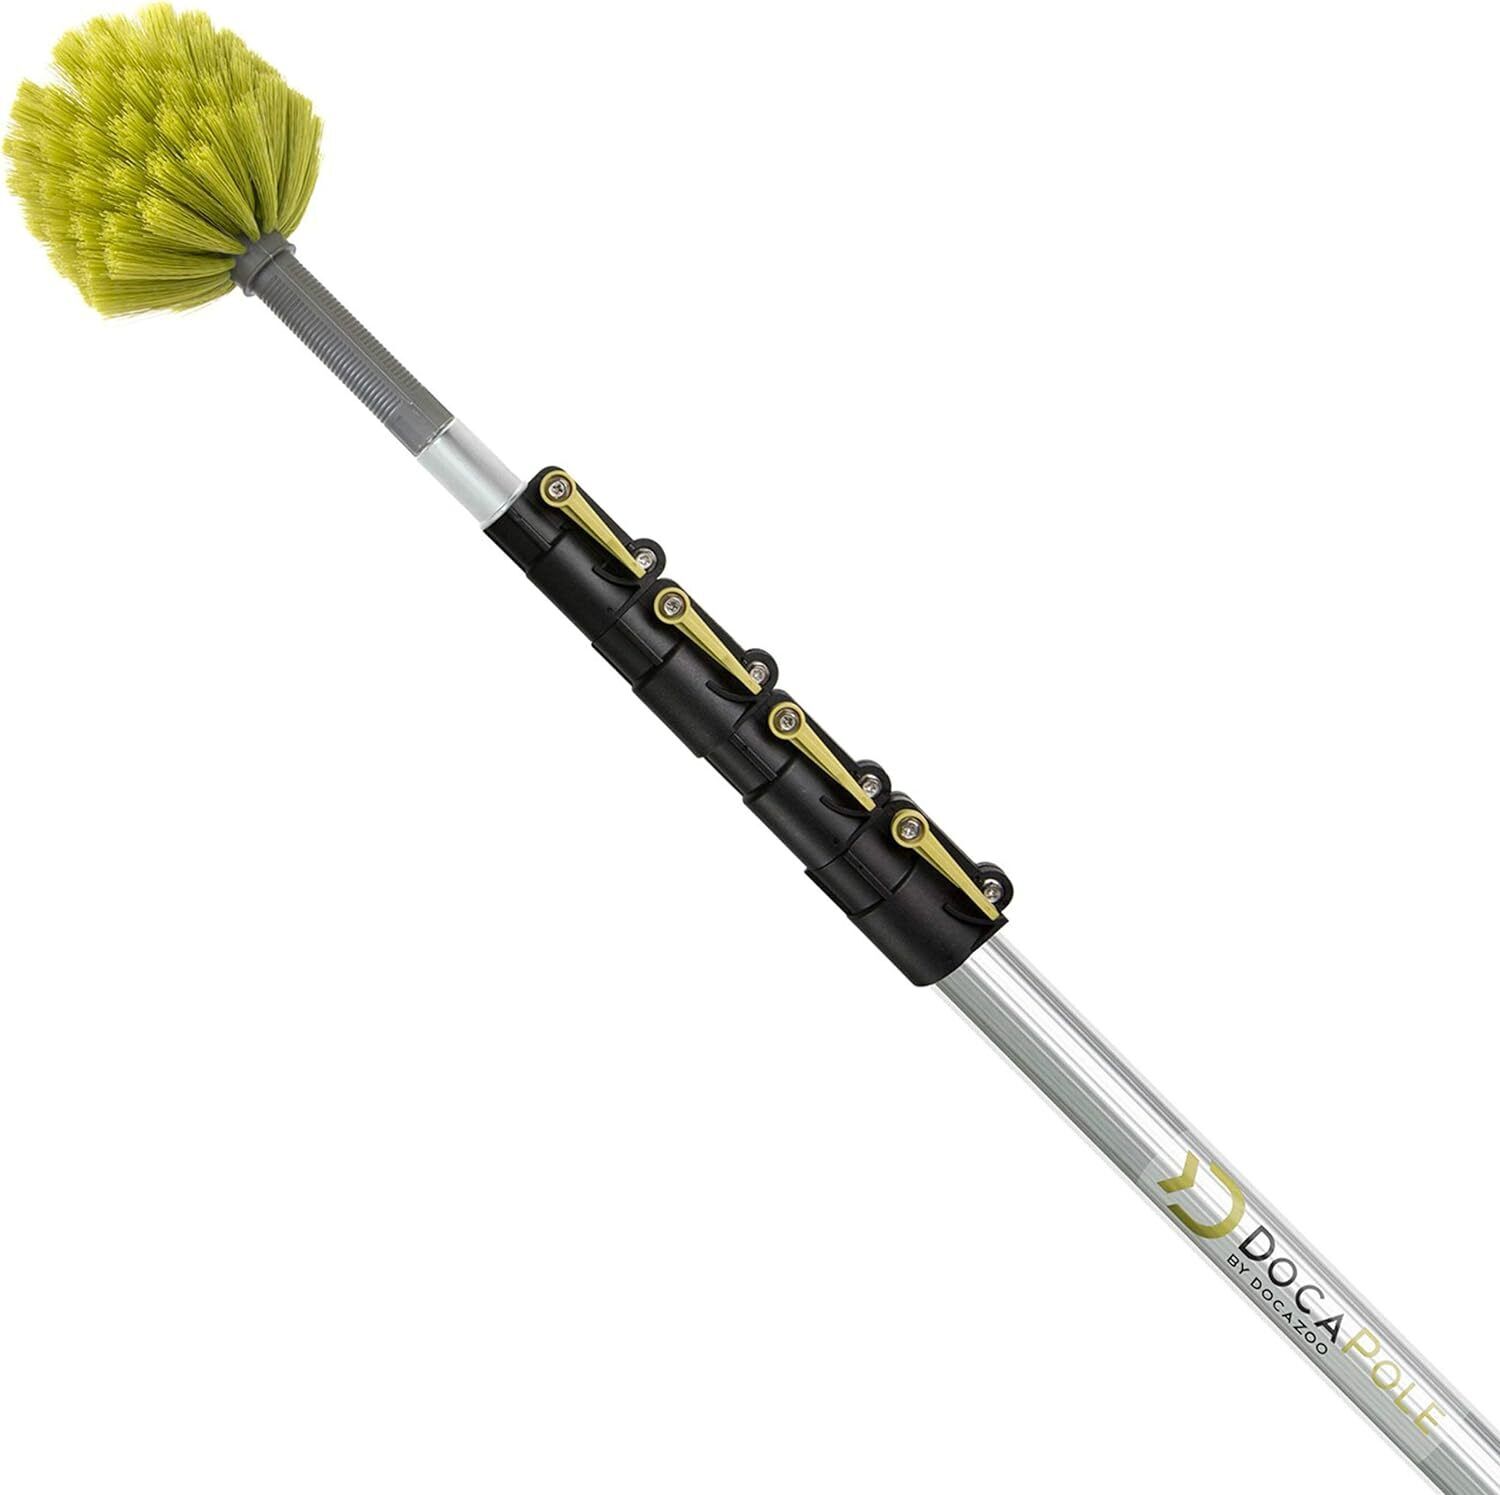 30 Foot Reach Cobweb Duster with 6-24 Foot Telescopic Extension Pole